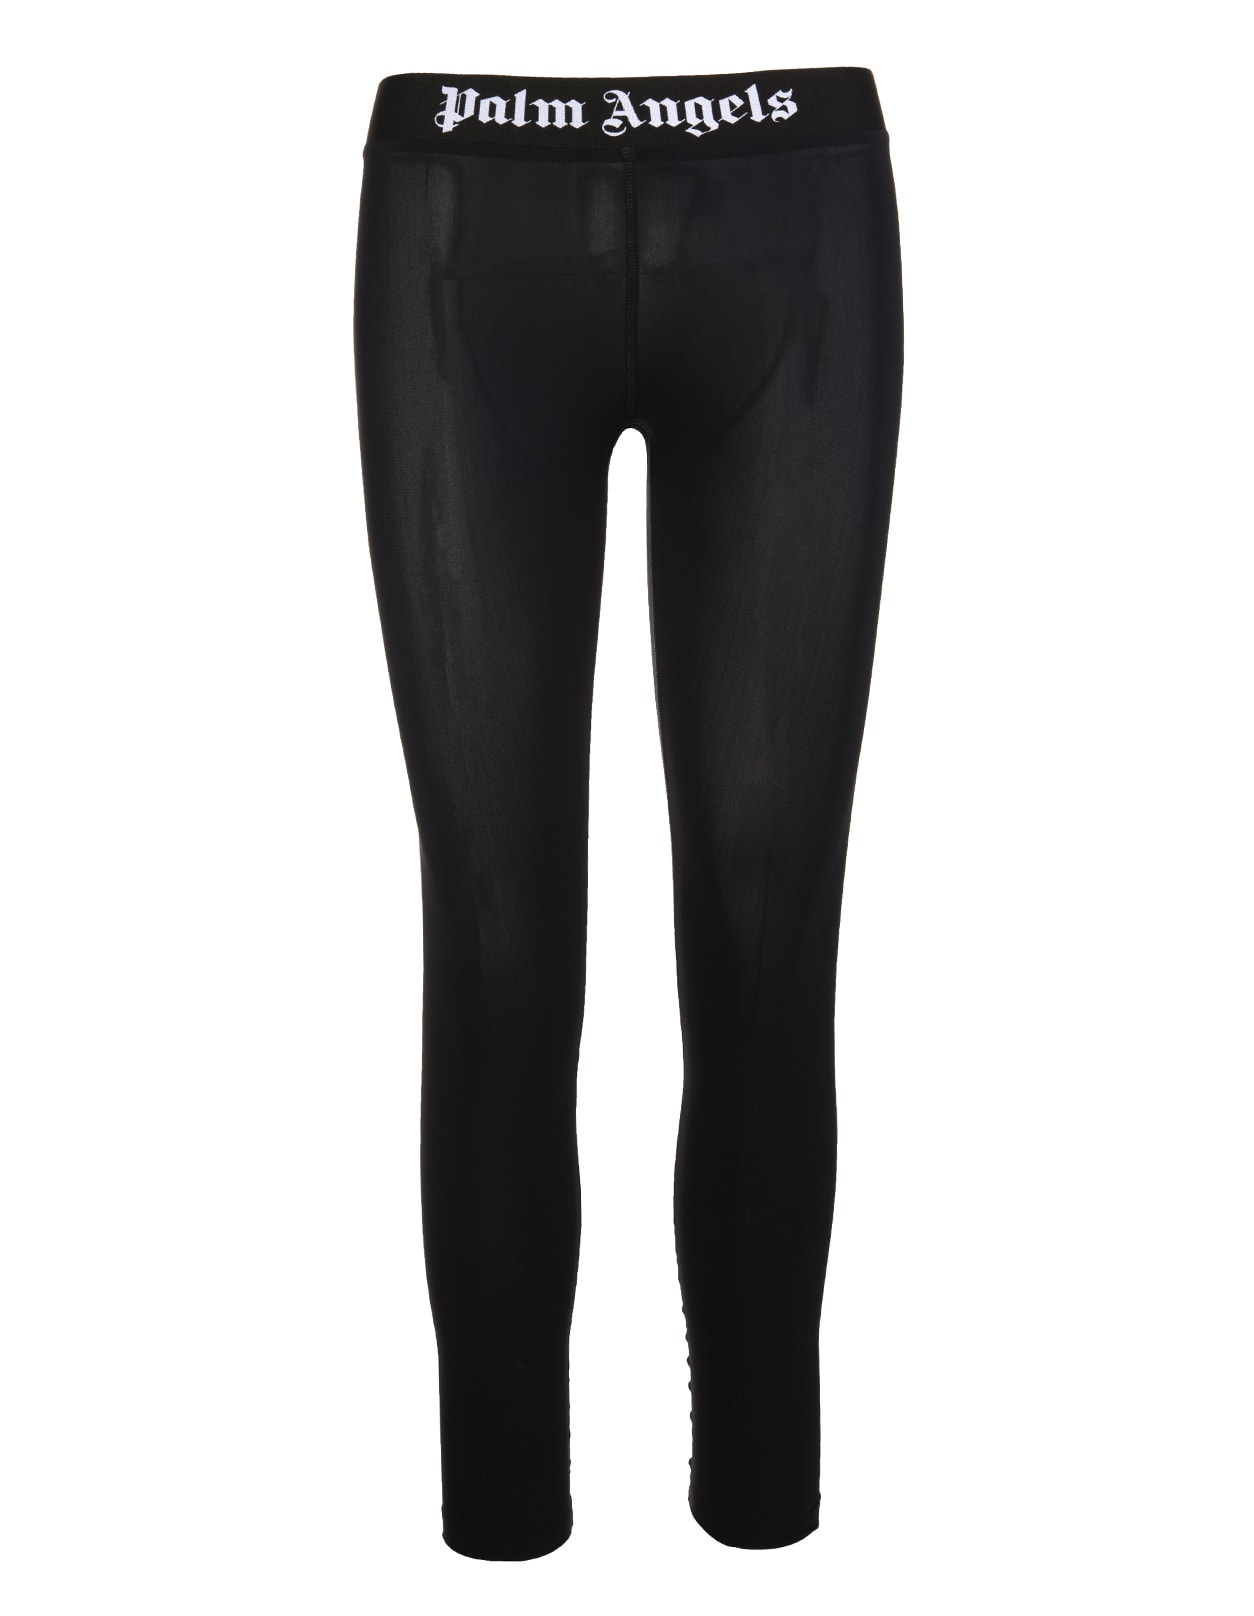 Palm Angels Woman Black Sports Leggings With White Logo On The Waist